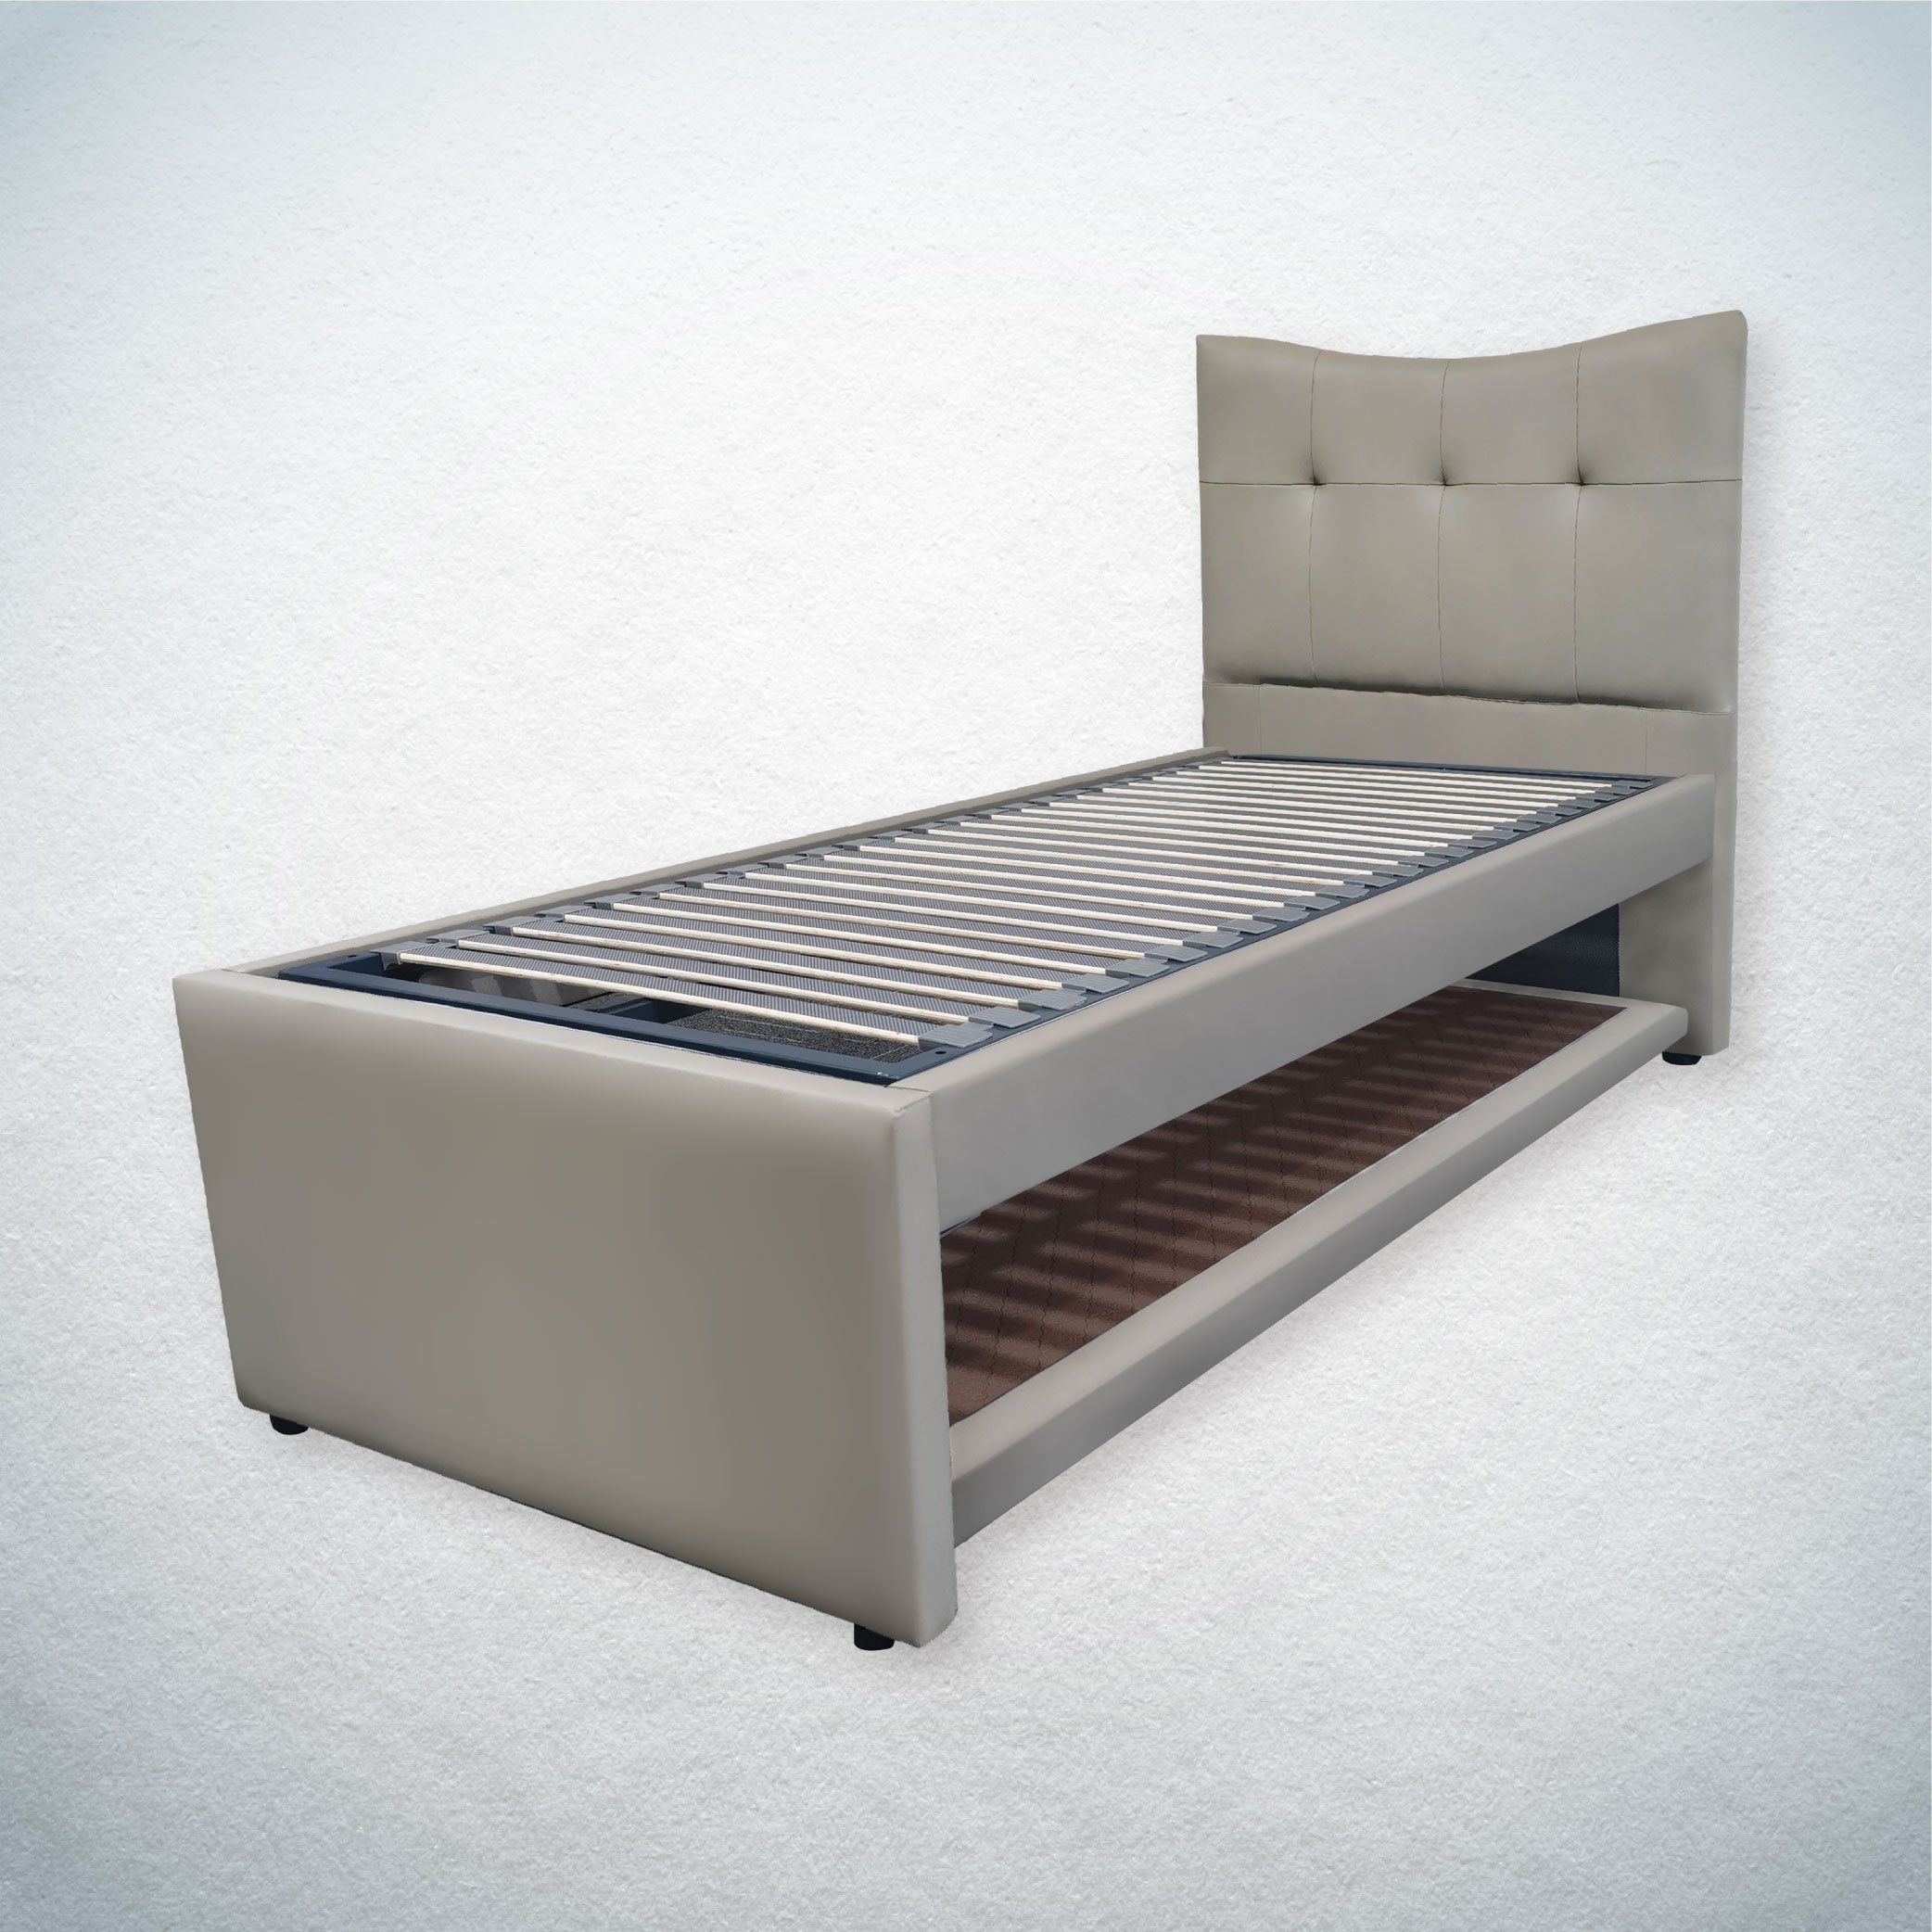 Classic Button Pull-out Bed Frame